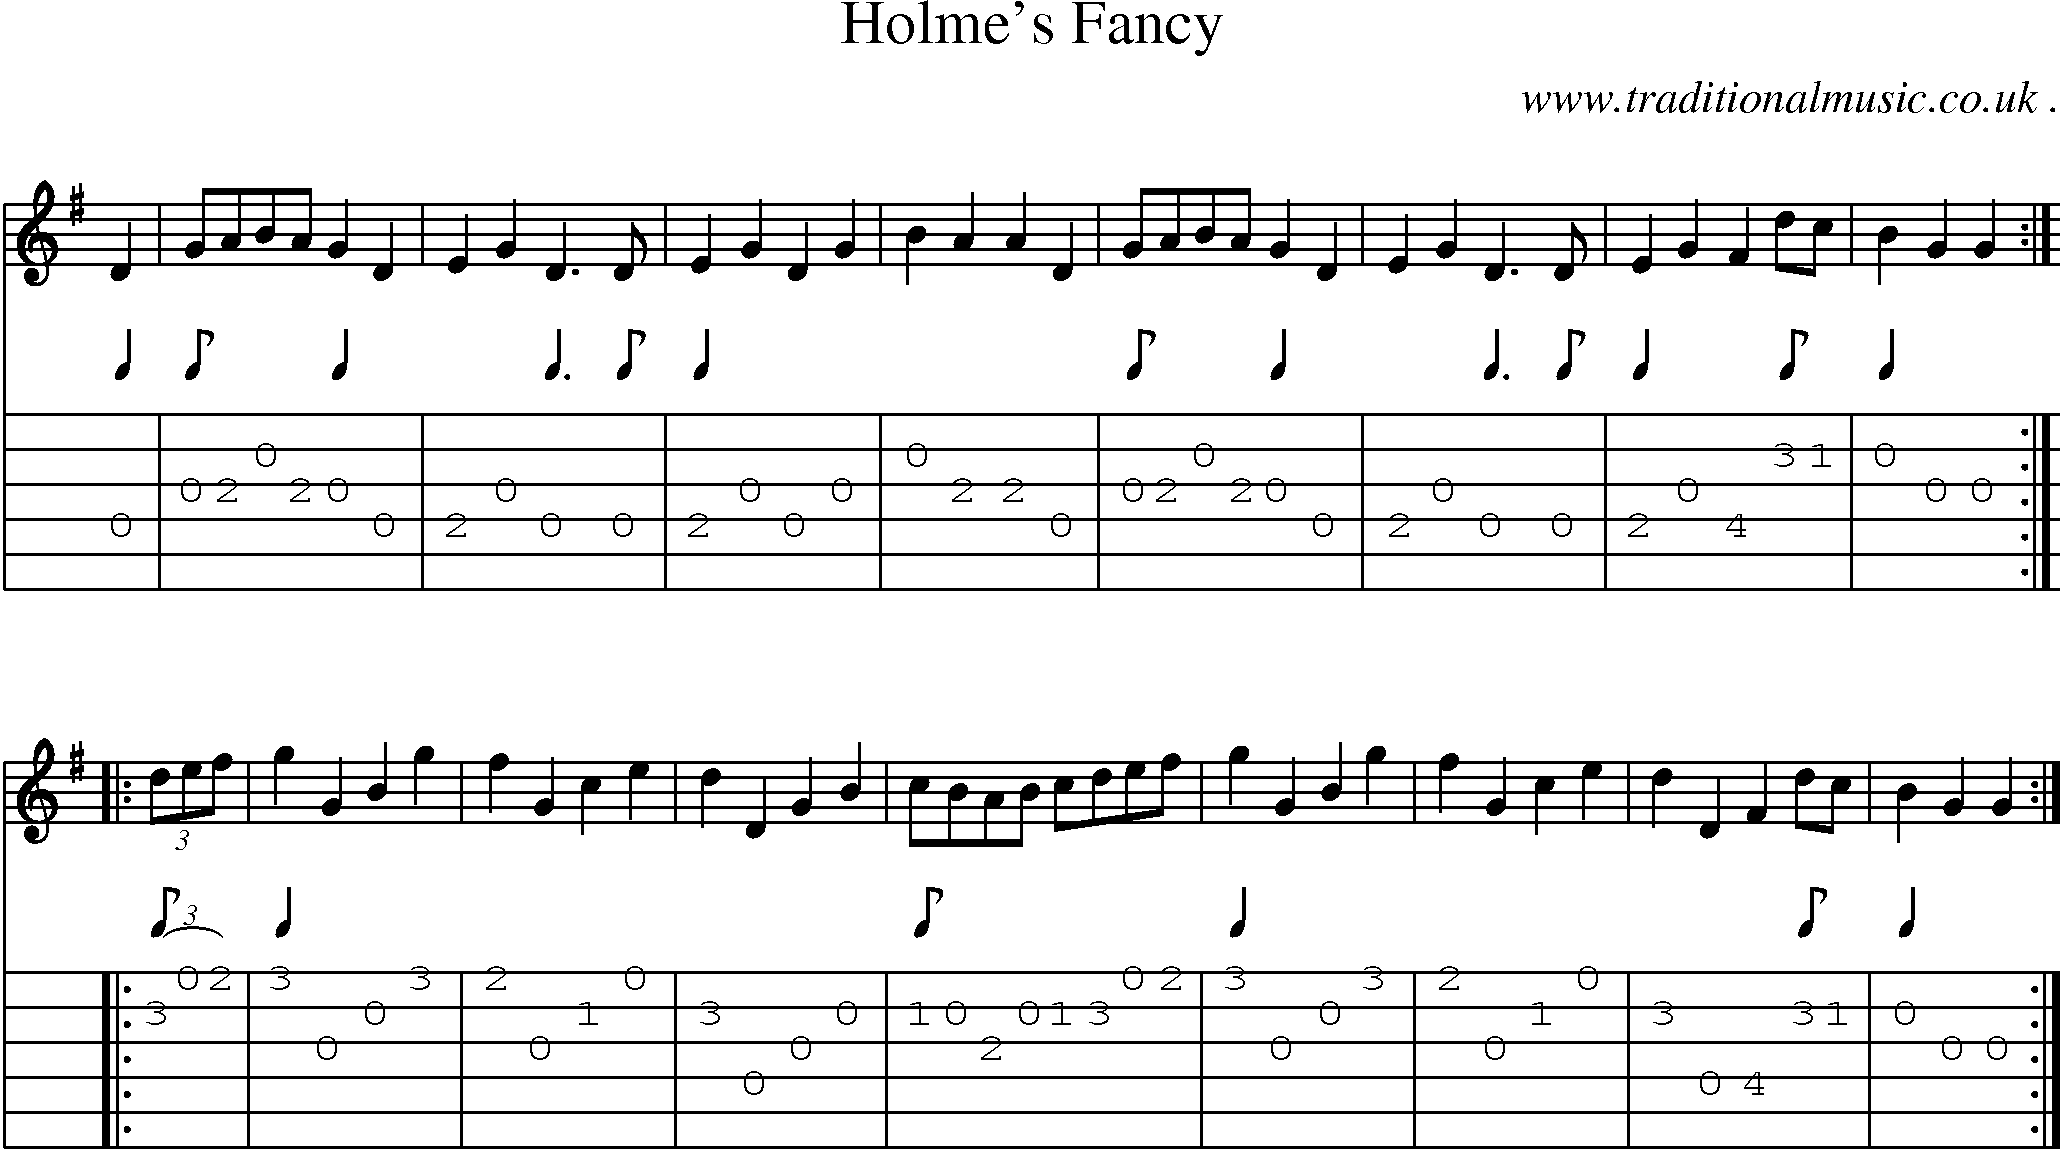 Sheet-Music and Guitar Tabs for Holmes Fancy